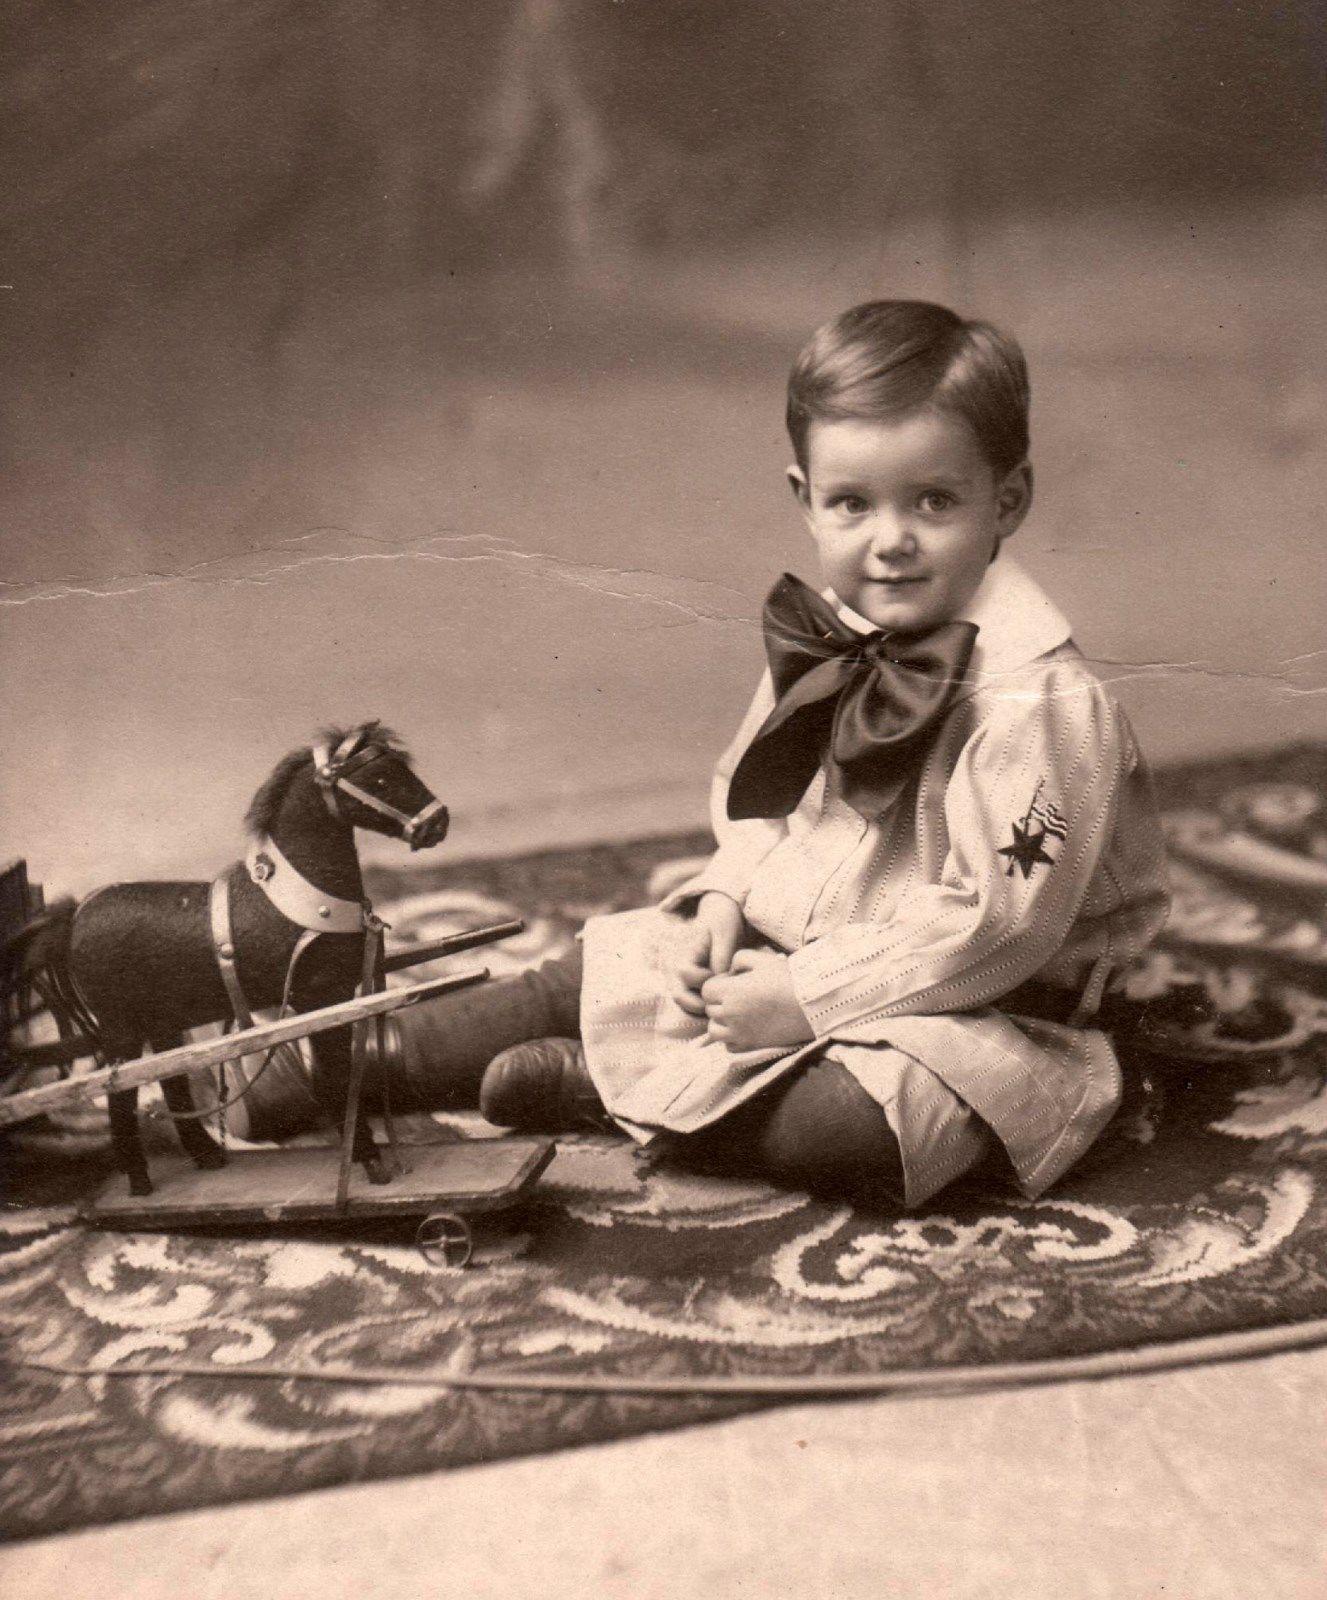 A boy with a vintage toy horse